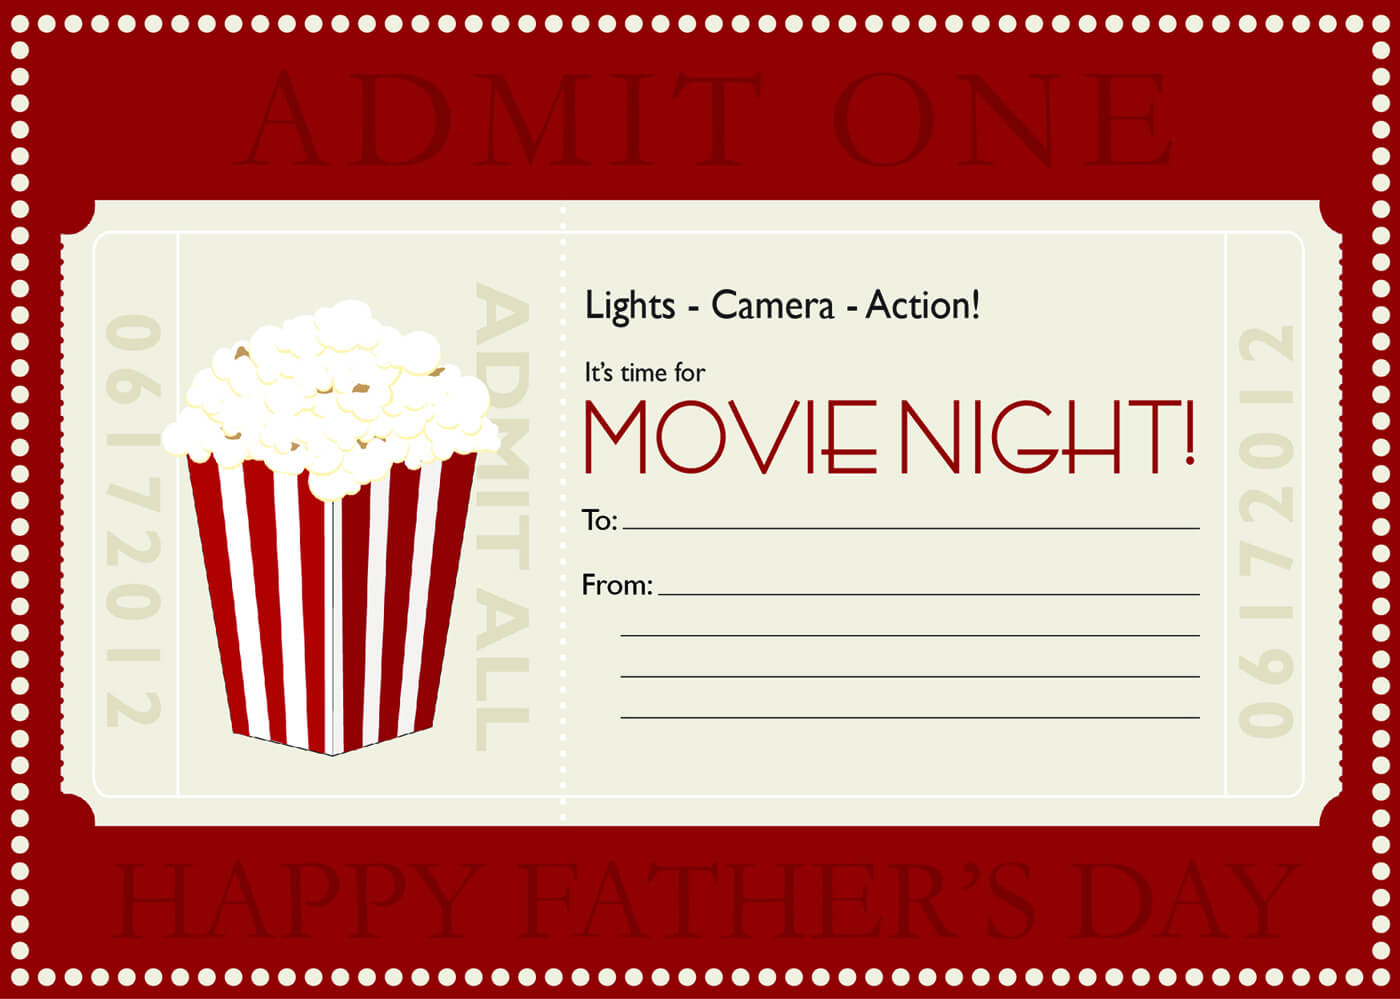 Movie Gift Certificate Templates | Gift Certificate Templates Inside Movie Gift Certificate Template